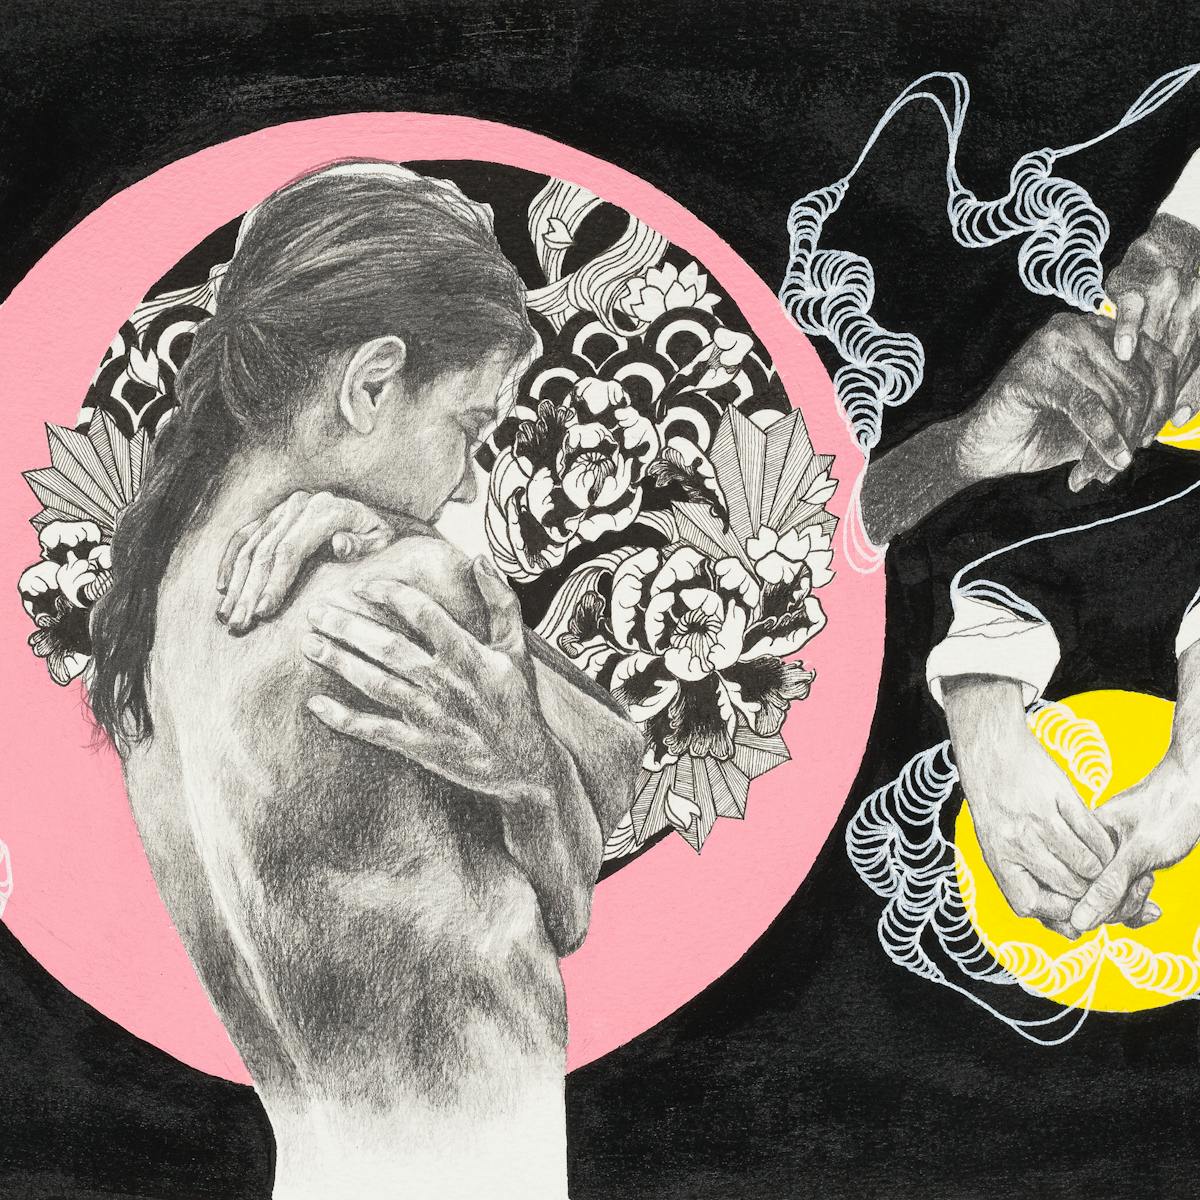 An artwork that combines life drawings of figures in pencil, detailed ink pen elements and painted colour sections against a black background. The central figure is a detailed pencil life drawing of a naked woman turned slightly away, her arms are wrapped around herself as if in an embrace. She is surrounded by detailed black ink drawings of foliage and encapsulated within a pale pink circle. In each corner of the artwork there are detailed pencil life drawings of pairs of hands, differing in ages and ethnicity. The hands are holding and touching each other and appear against separate yellow circles. Each group of hands is connected by detailed white lines against the black background.